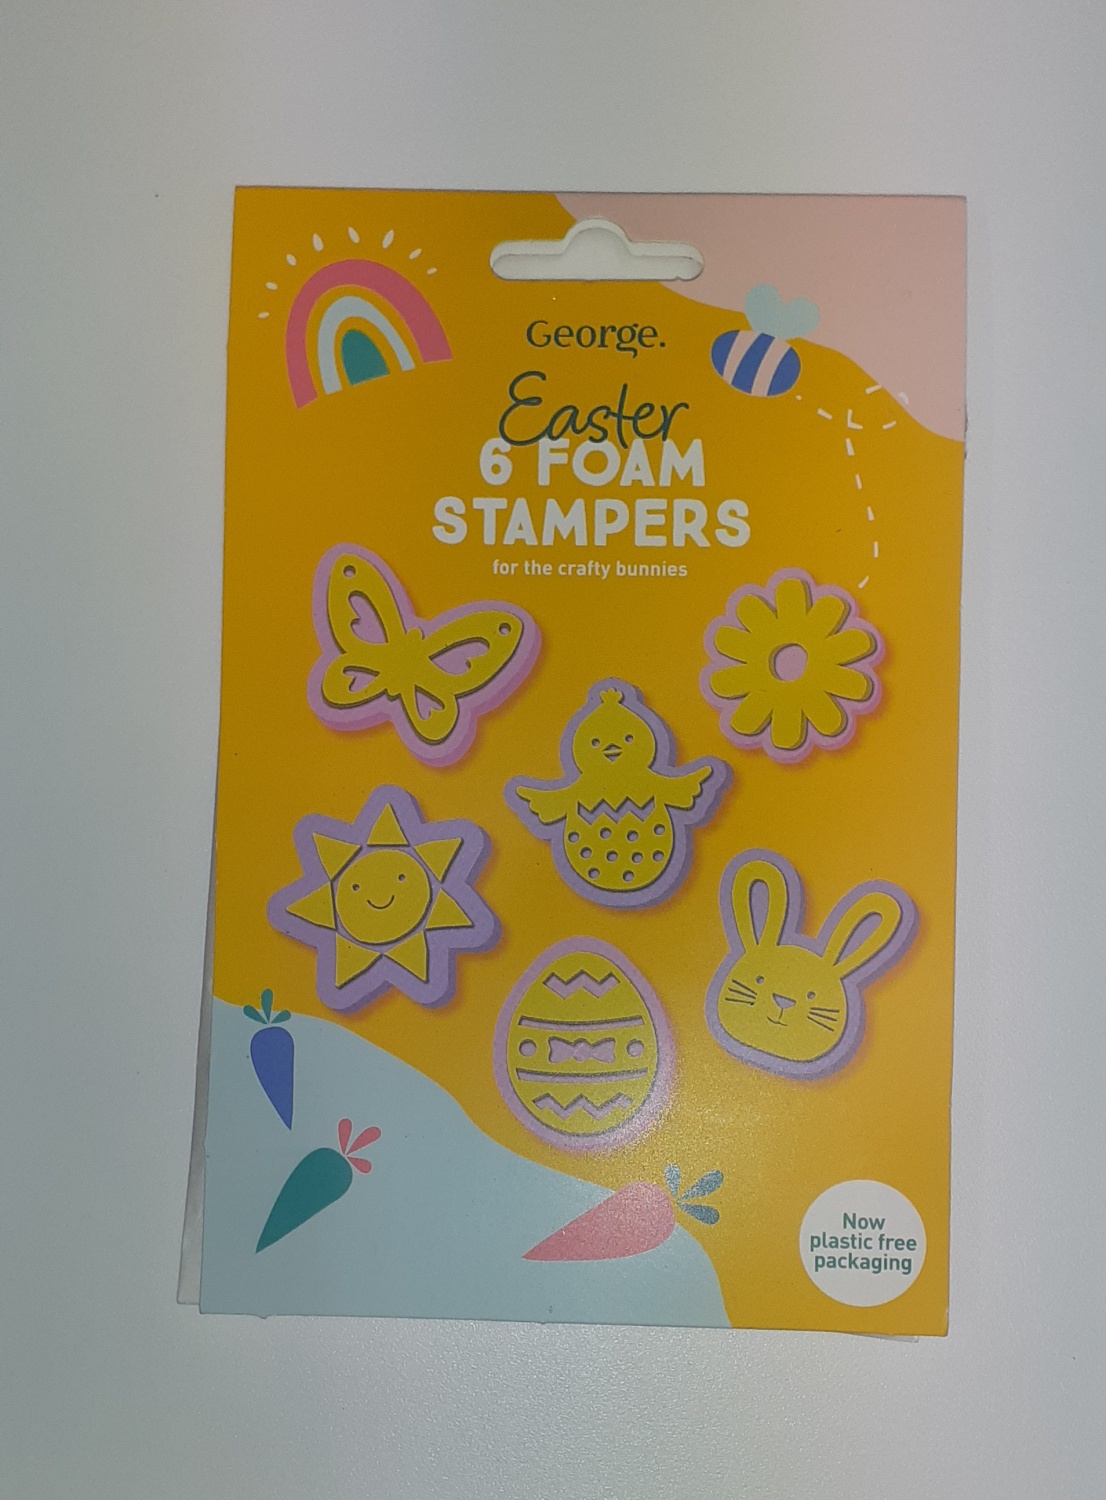 George Easter 6 Pack Foam Stampers RRP 1 CLEARANCE XL 39p or 3 for 99p